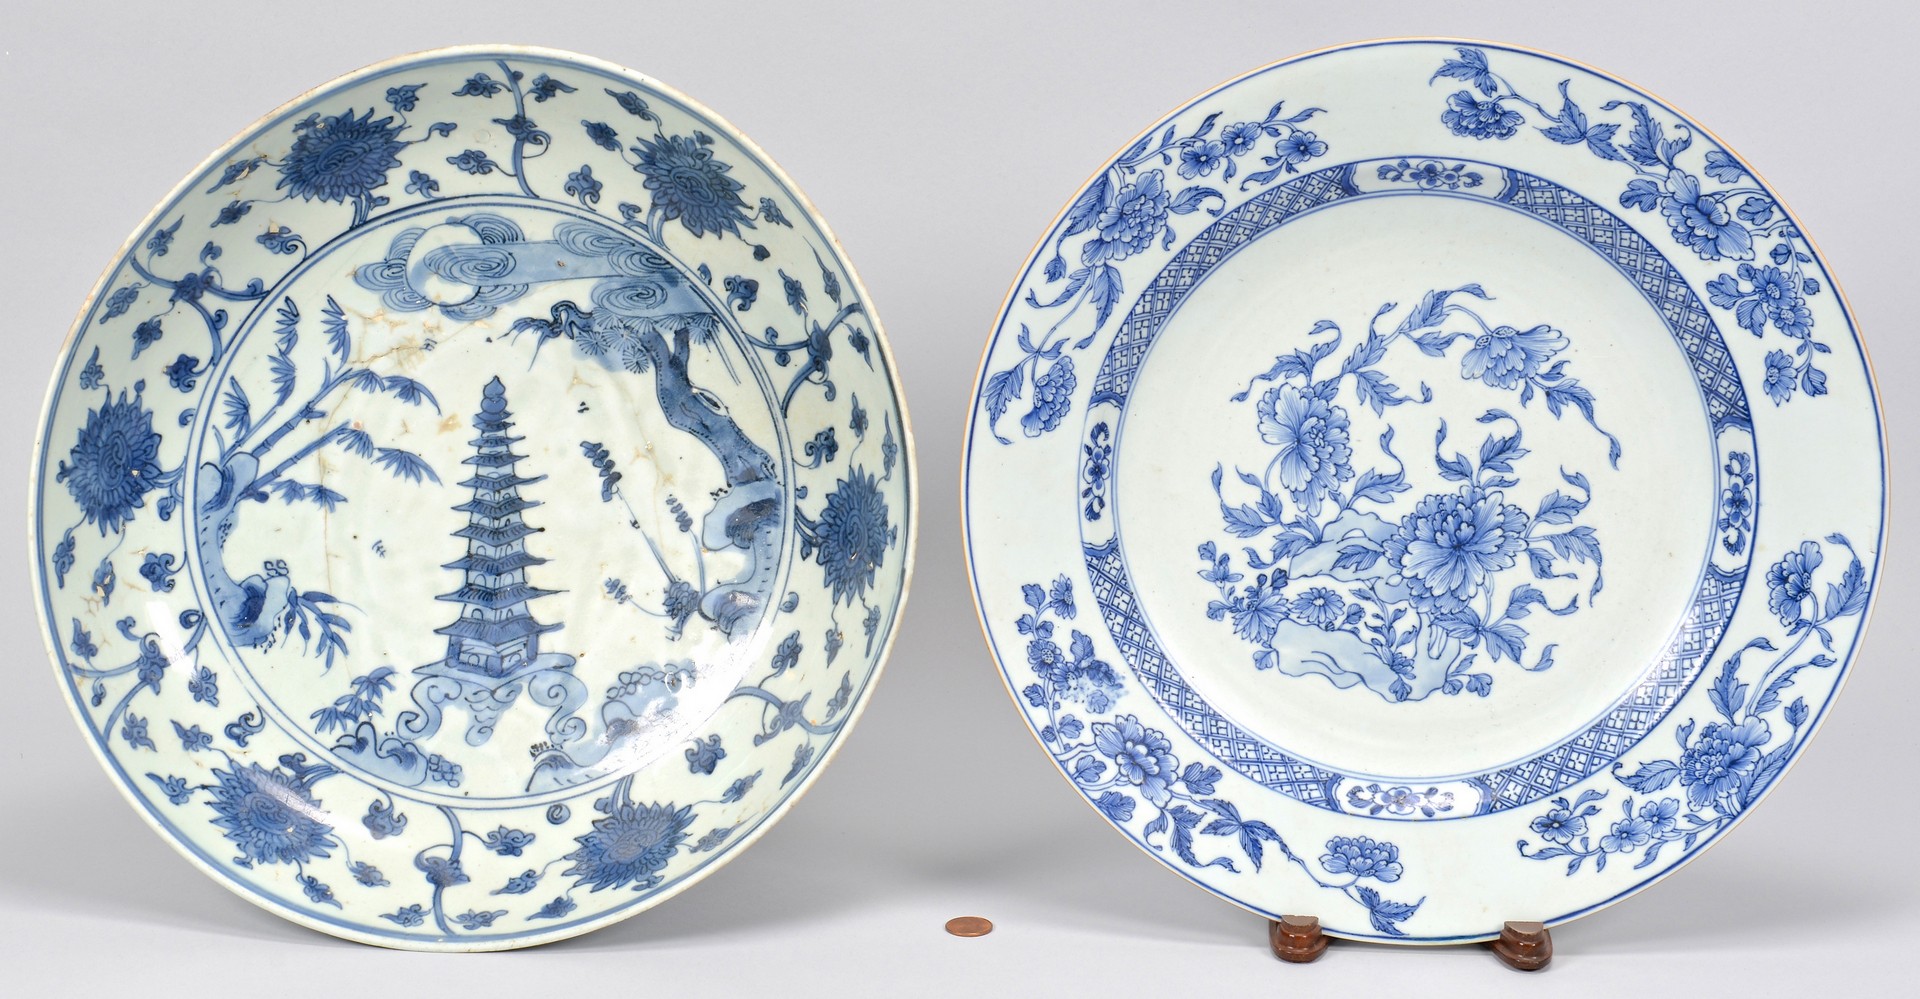 Lot 414: 5 Asian Themed Blue & White Plates/Chargers